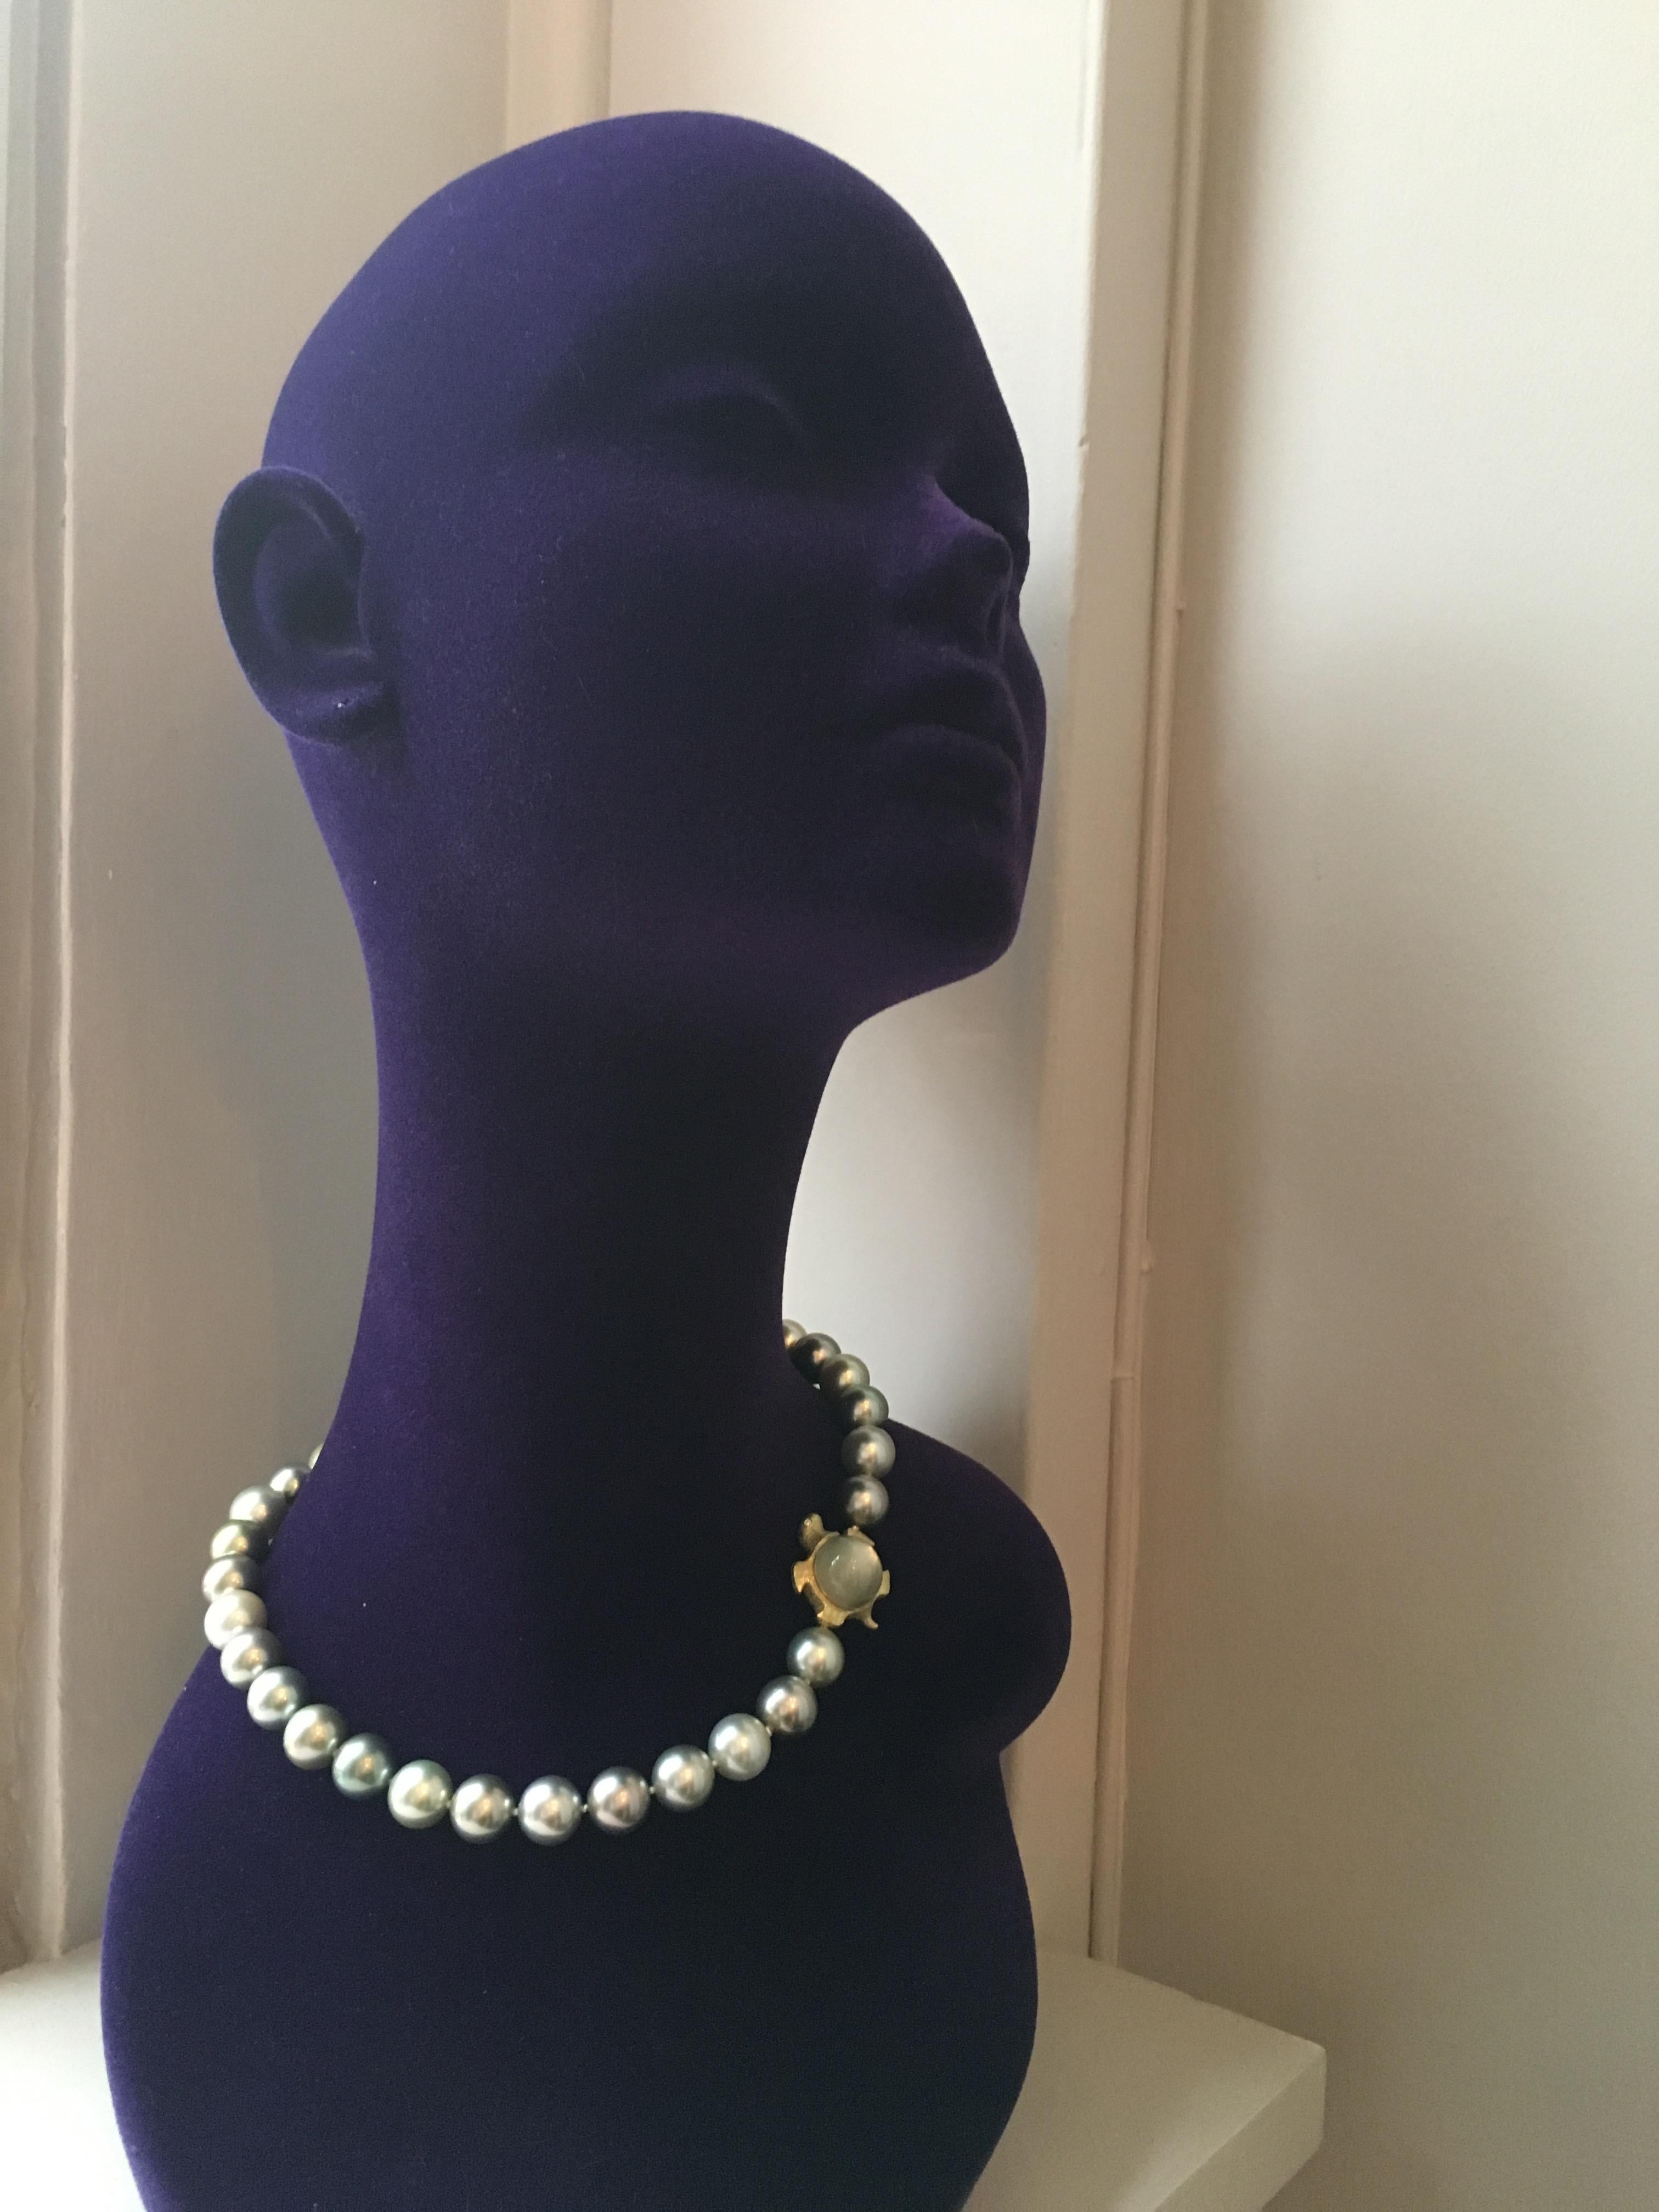 18 Karat Gold Tahiti Pearl Necklace with Moonstone Tortoise Clasp For Sale 1